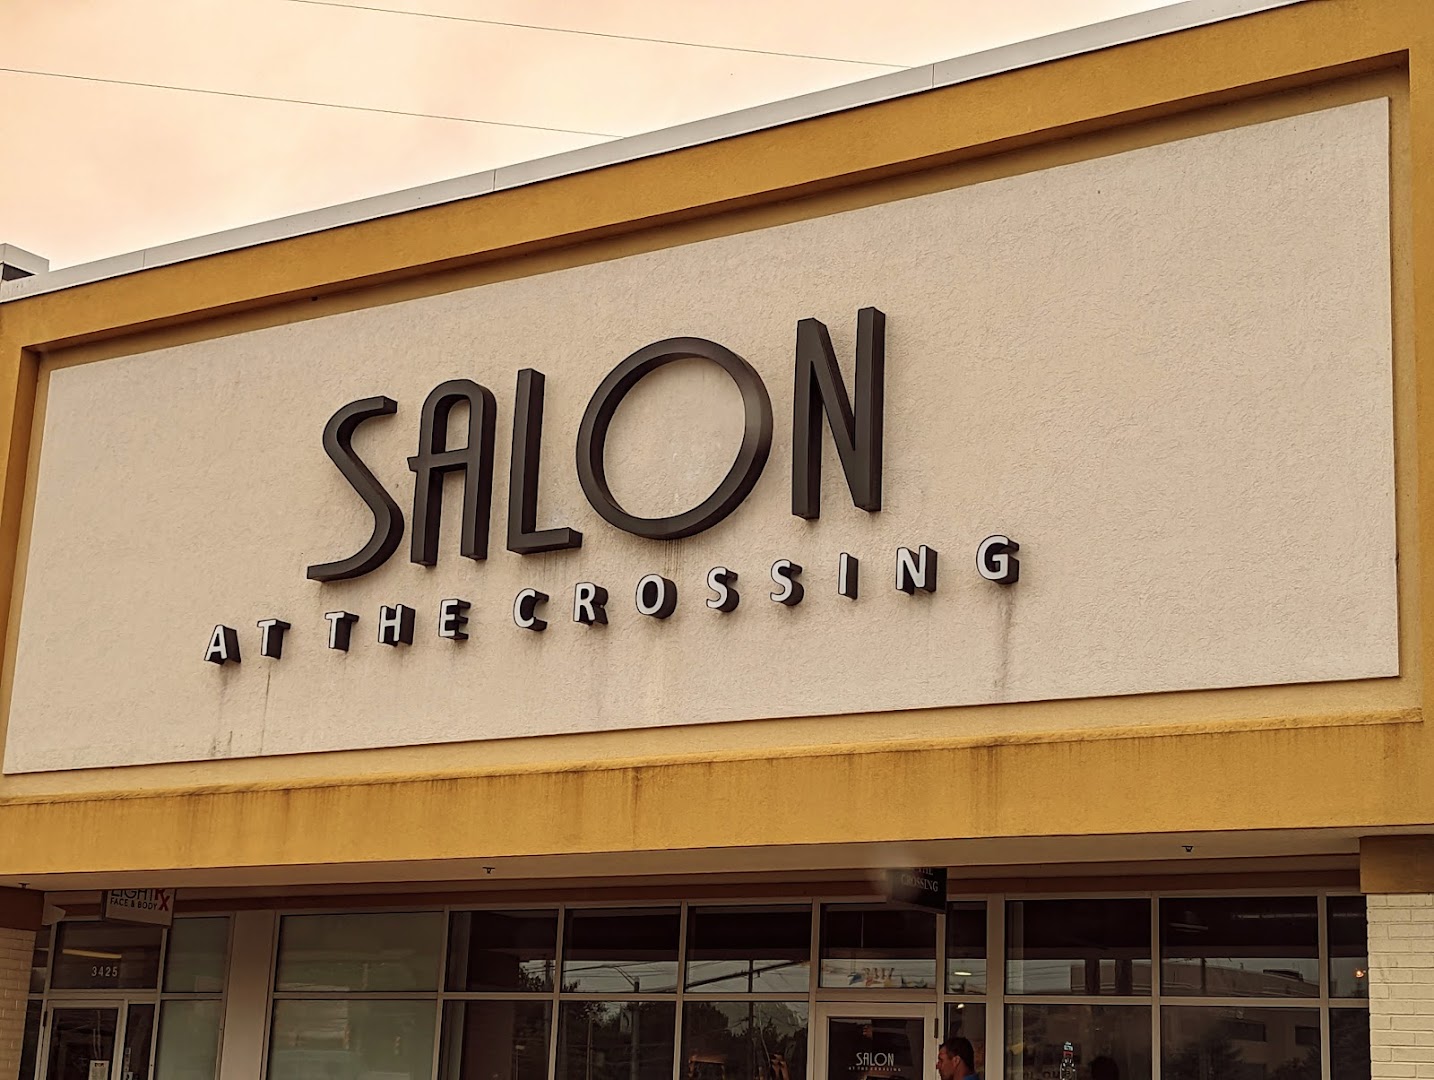 Salon at the crossing